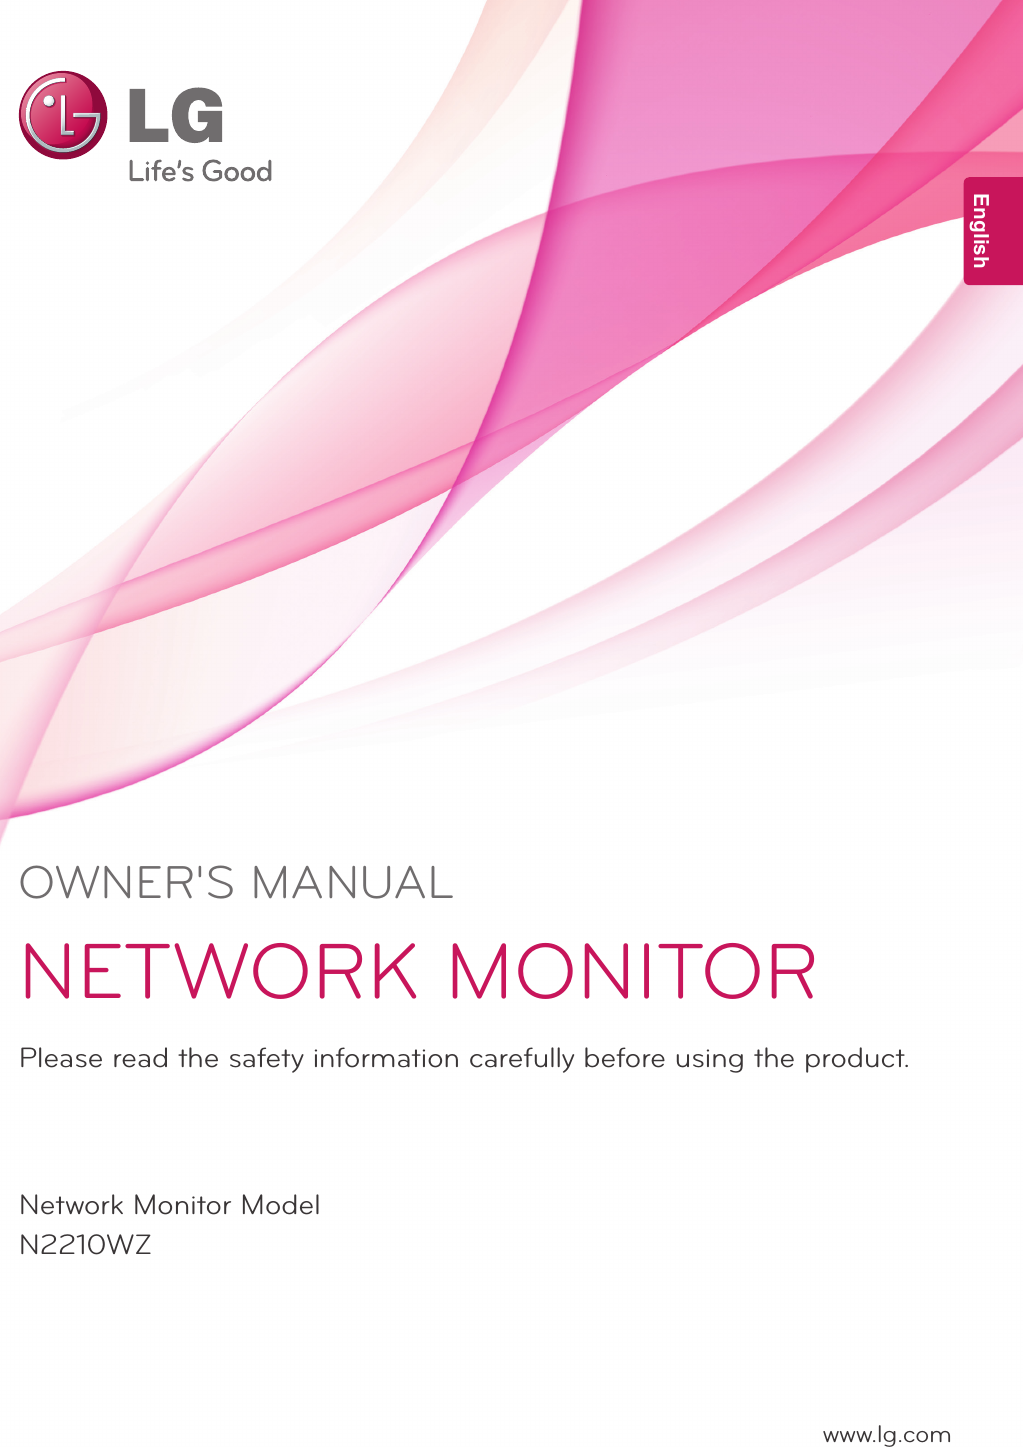 www.lg.comOWNER&apos;S MANUALNETWORK MONITORN2210WZPlease read the safety information carefully before using the product.Network Monitor ModelEnglish